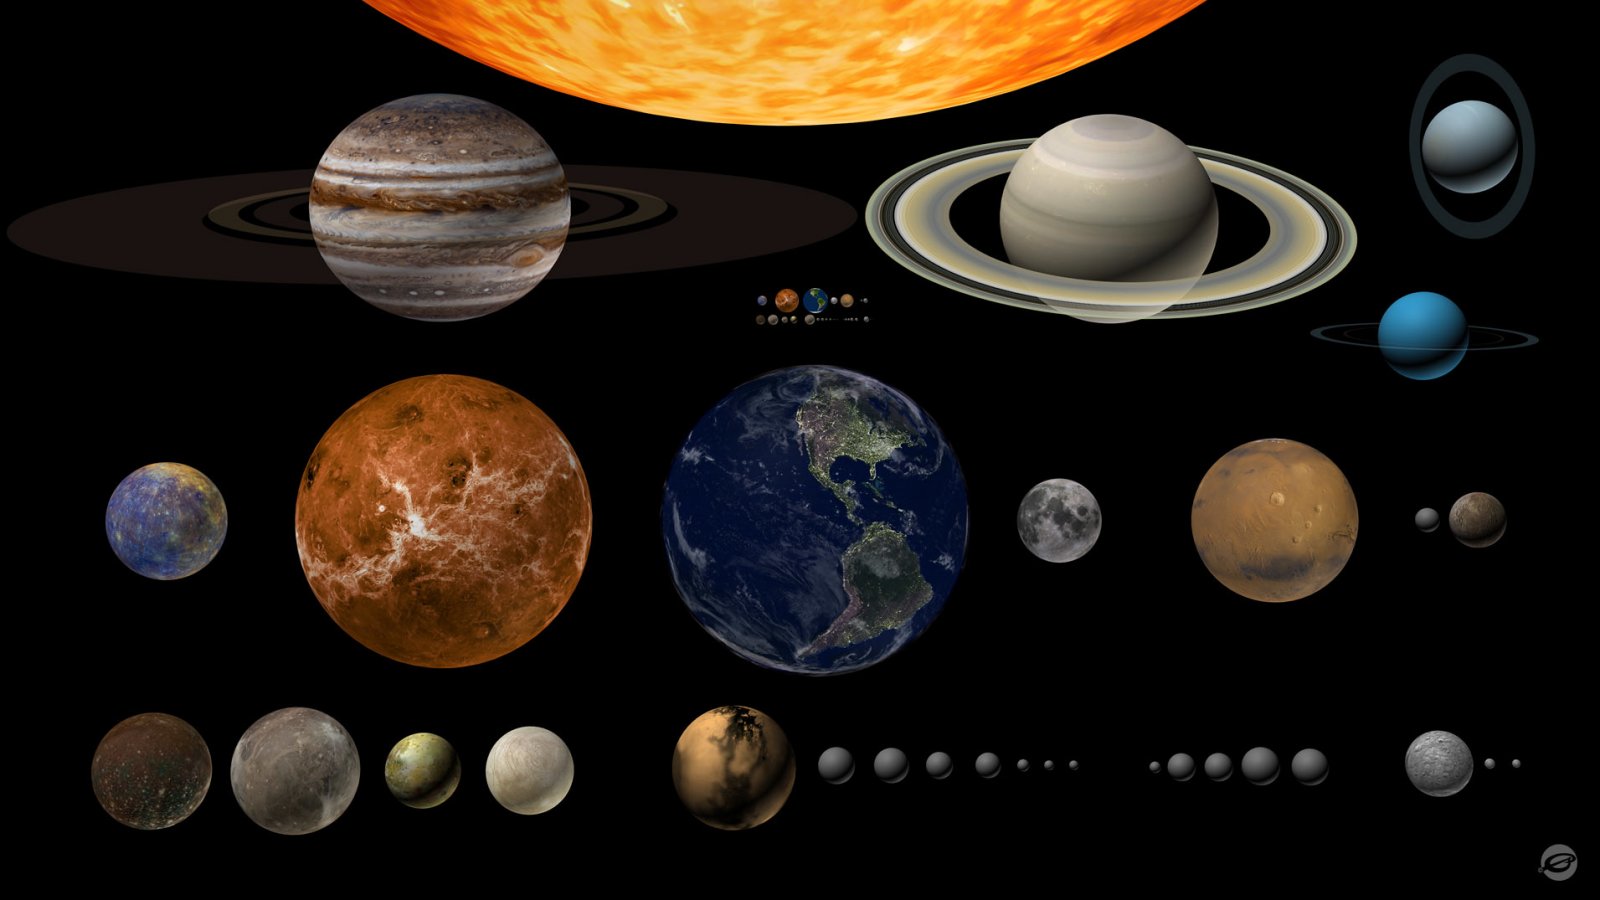 Diagram of the solar system